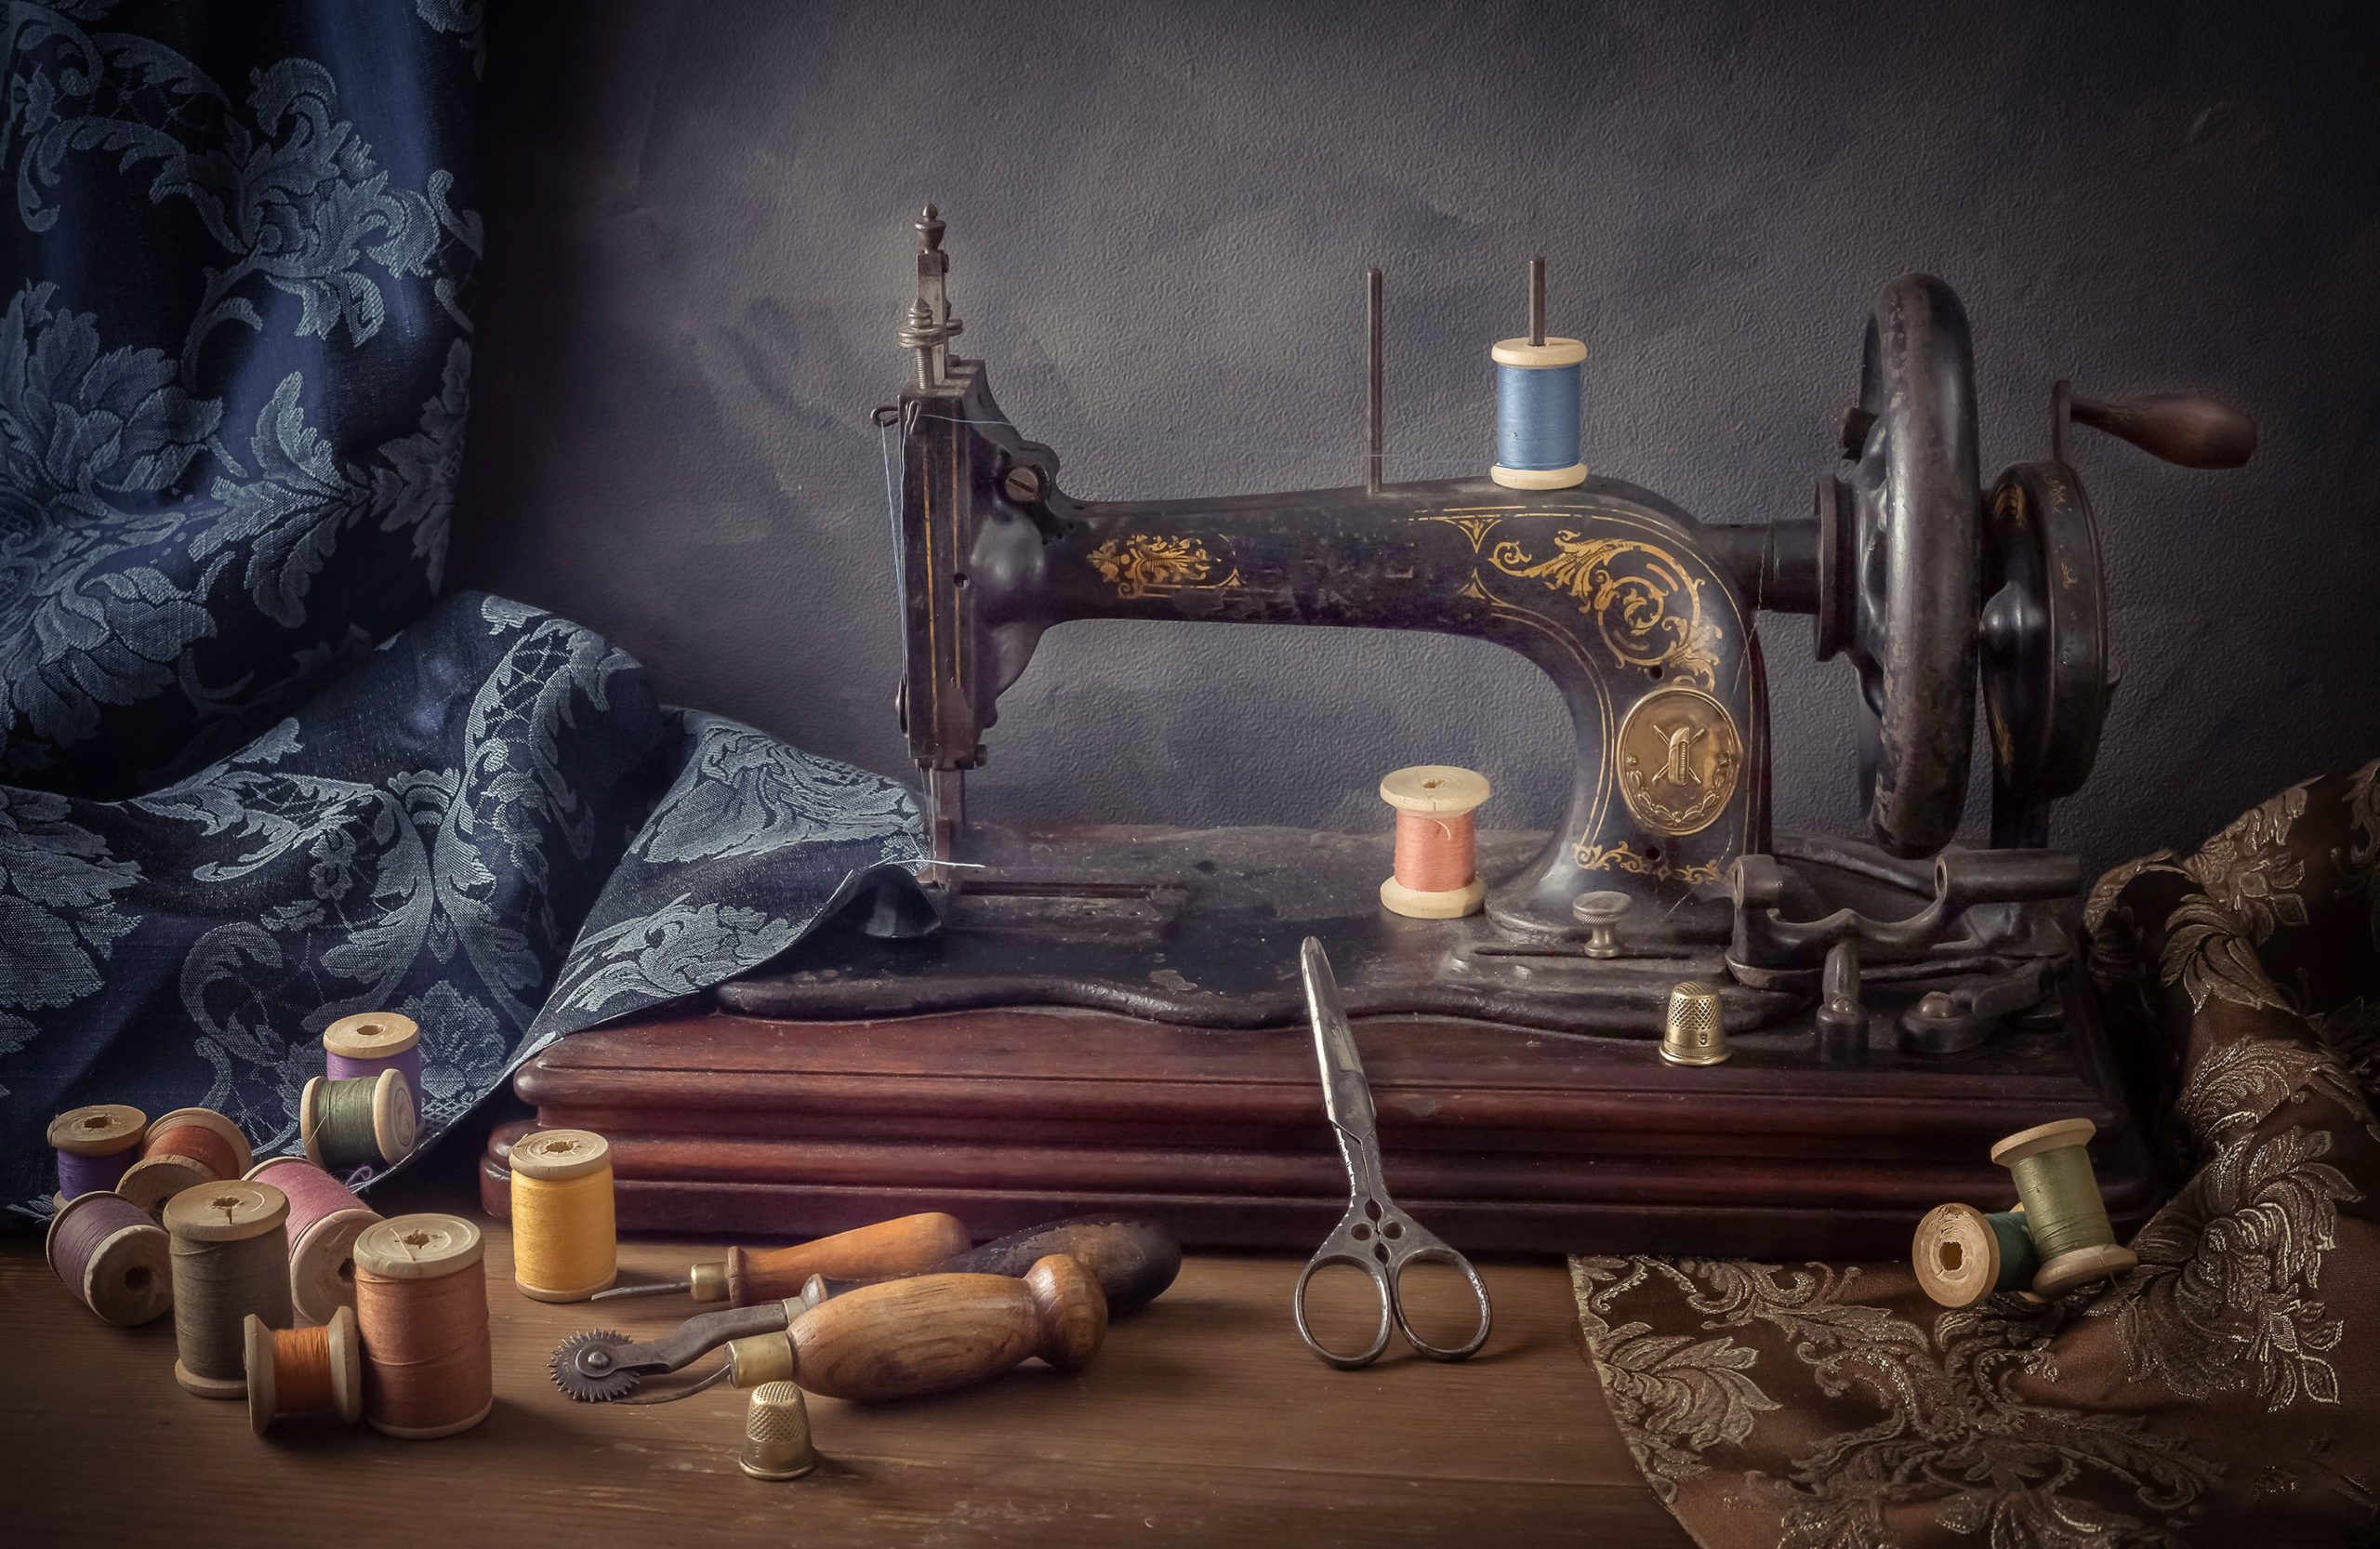 The (Dramatic) History of the Sewing Machine - Cathey's Sewing Vacuum